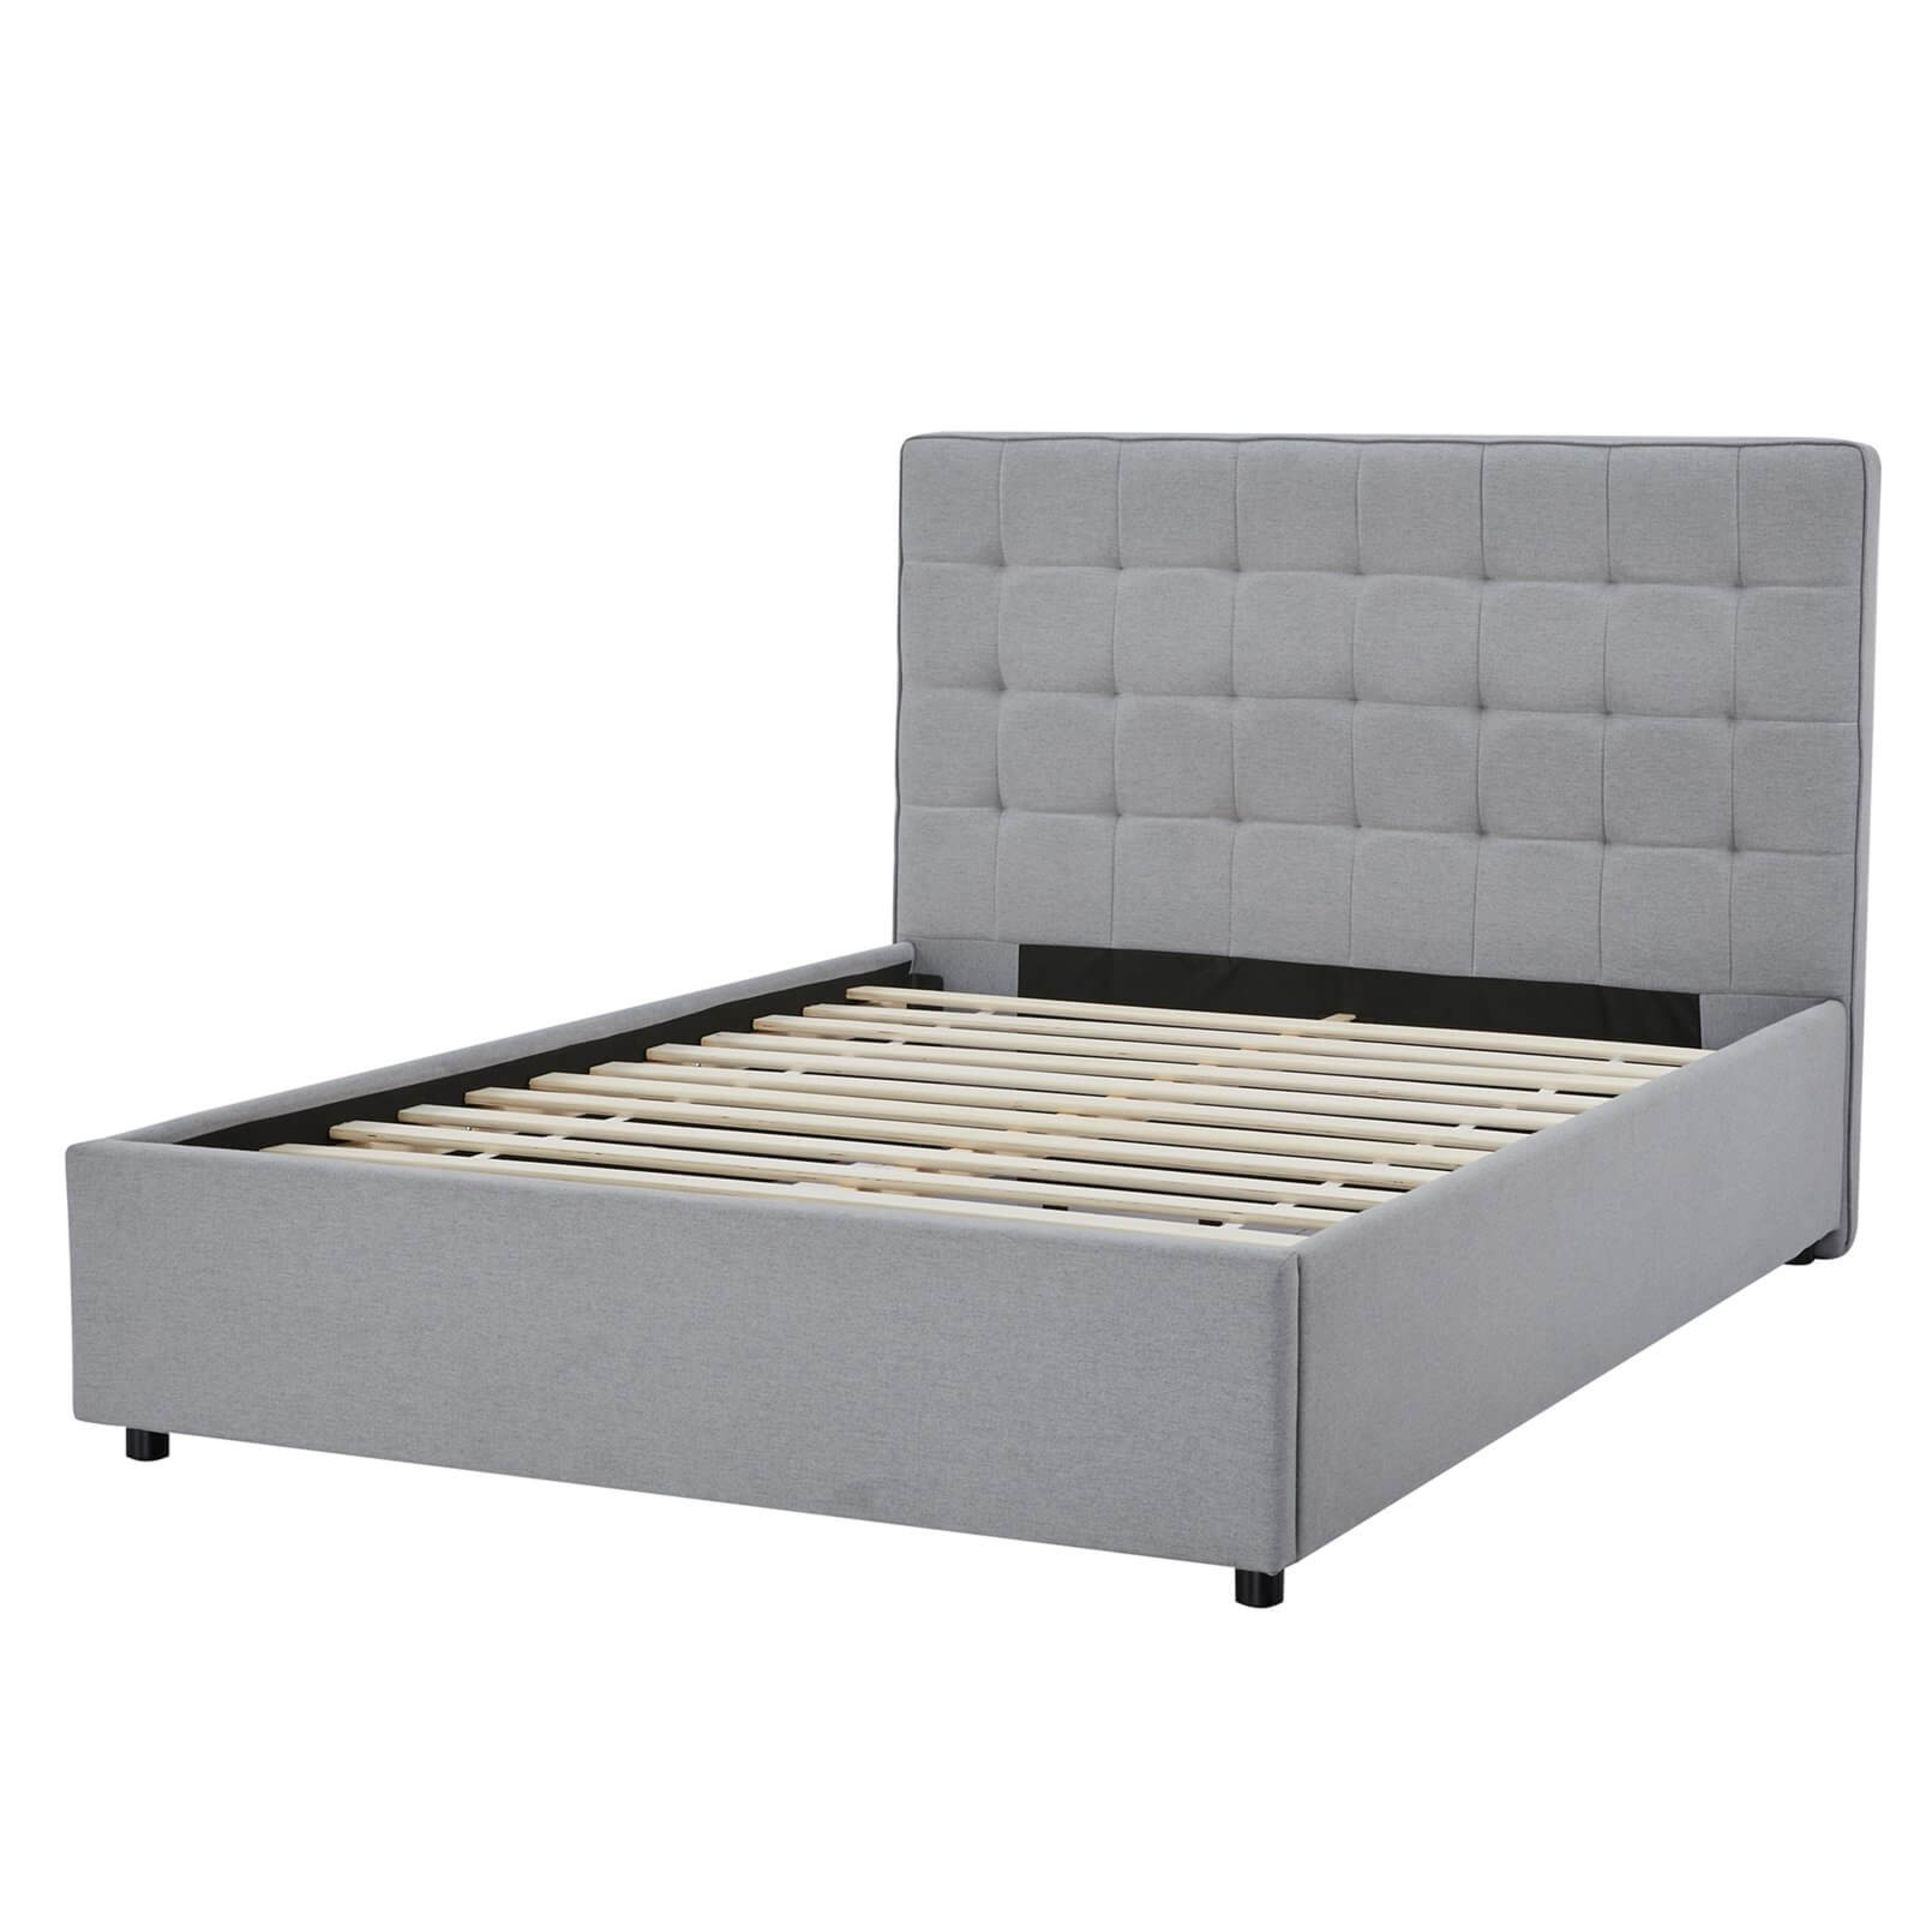 (R11) 1 X Double Grey Upholstered Bed With Sprung Slats. Contains Headboard & Slats. (H88 x W147 x